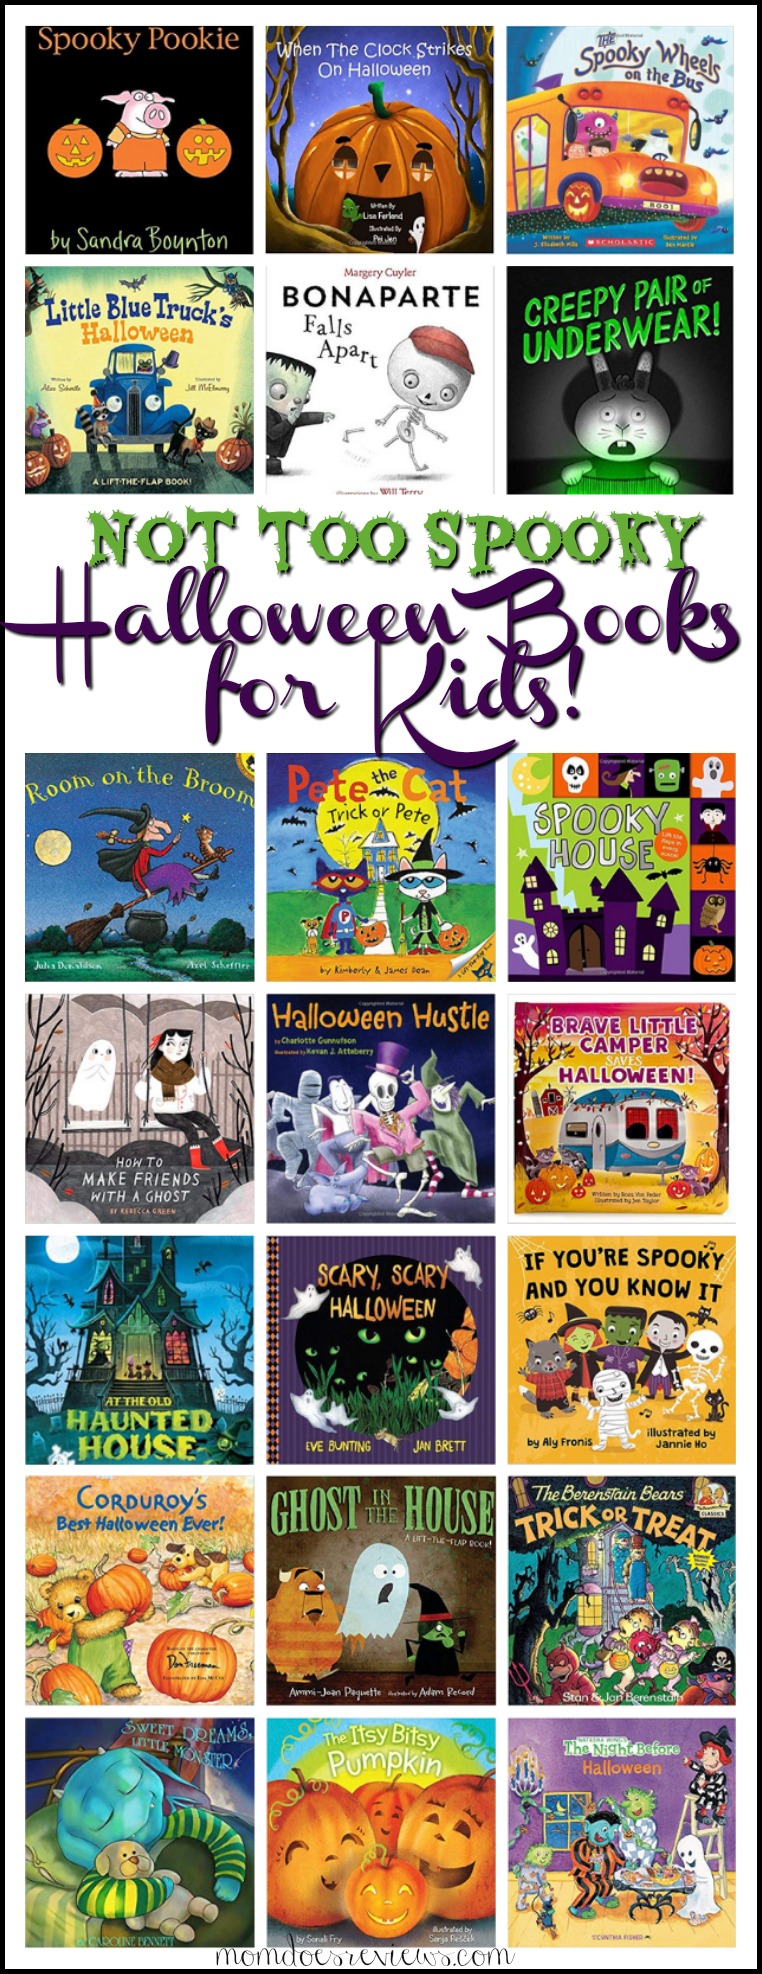 Not too Spooky Halloween Books for Kids!